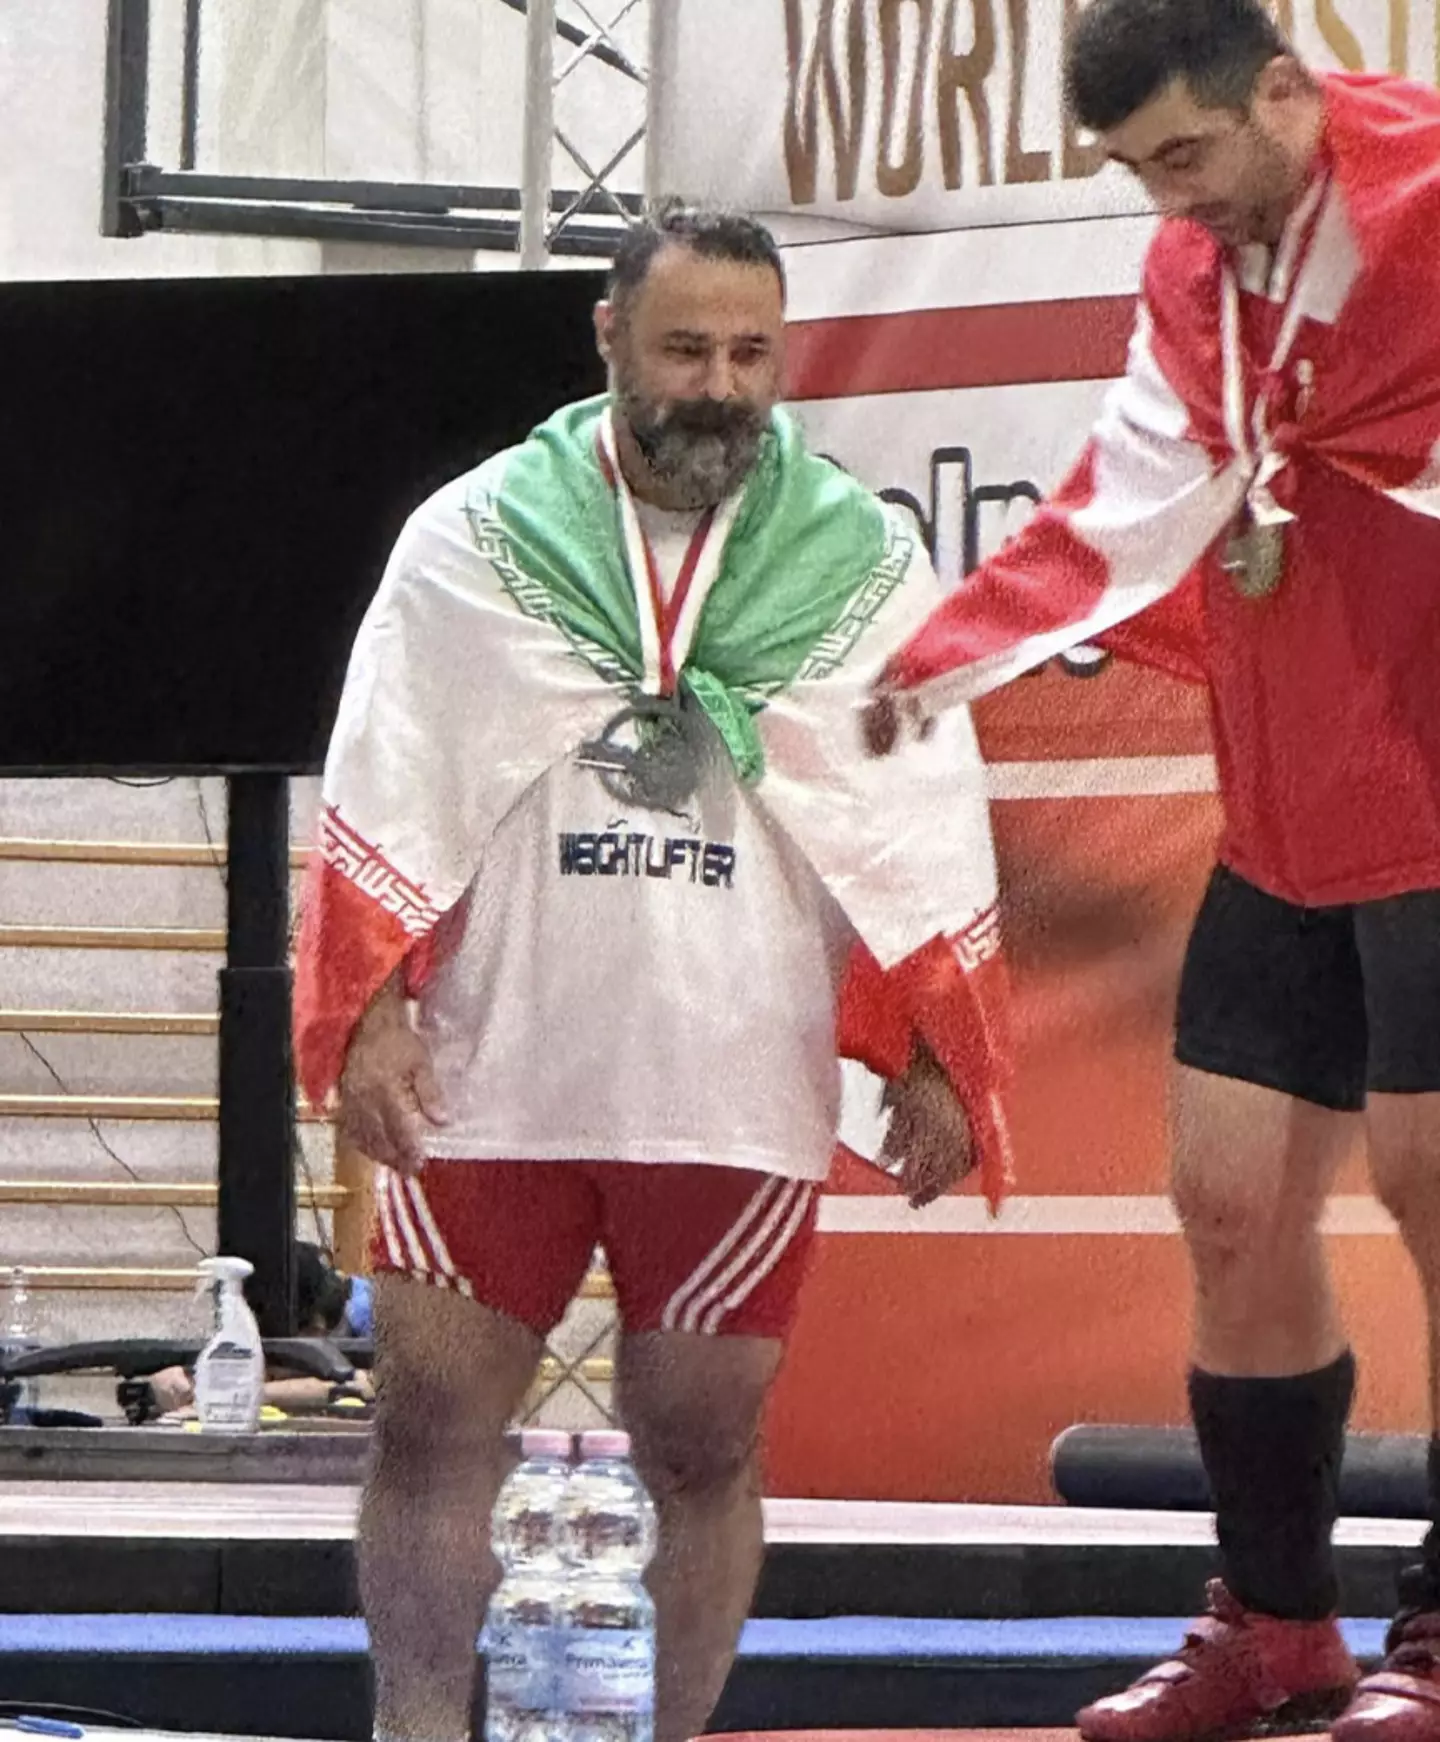 The federation has strictly prohibited contact between Iranian and Israeli athletes for years.